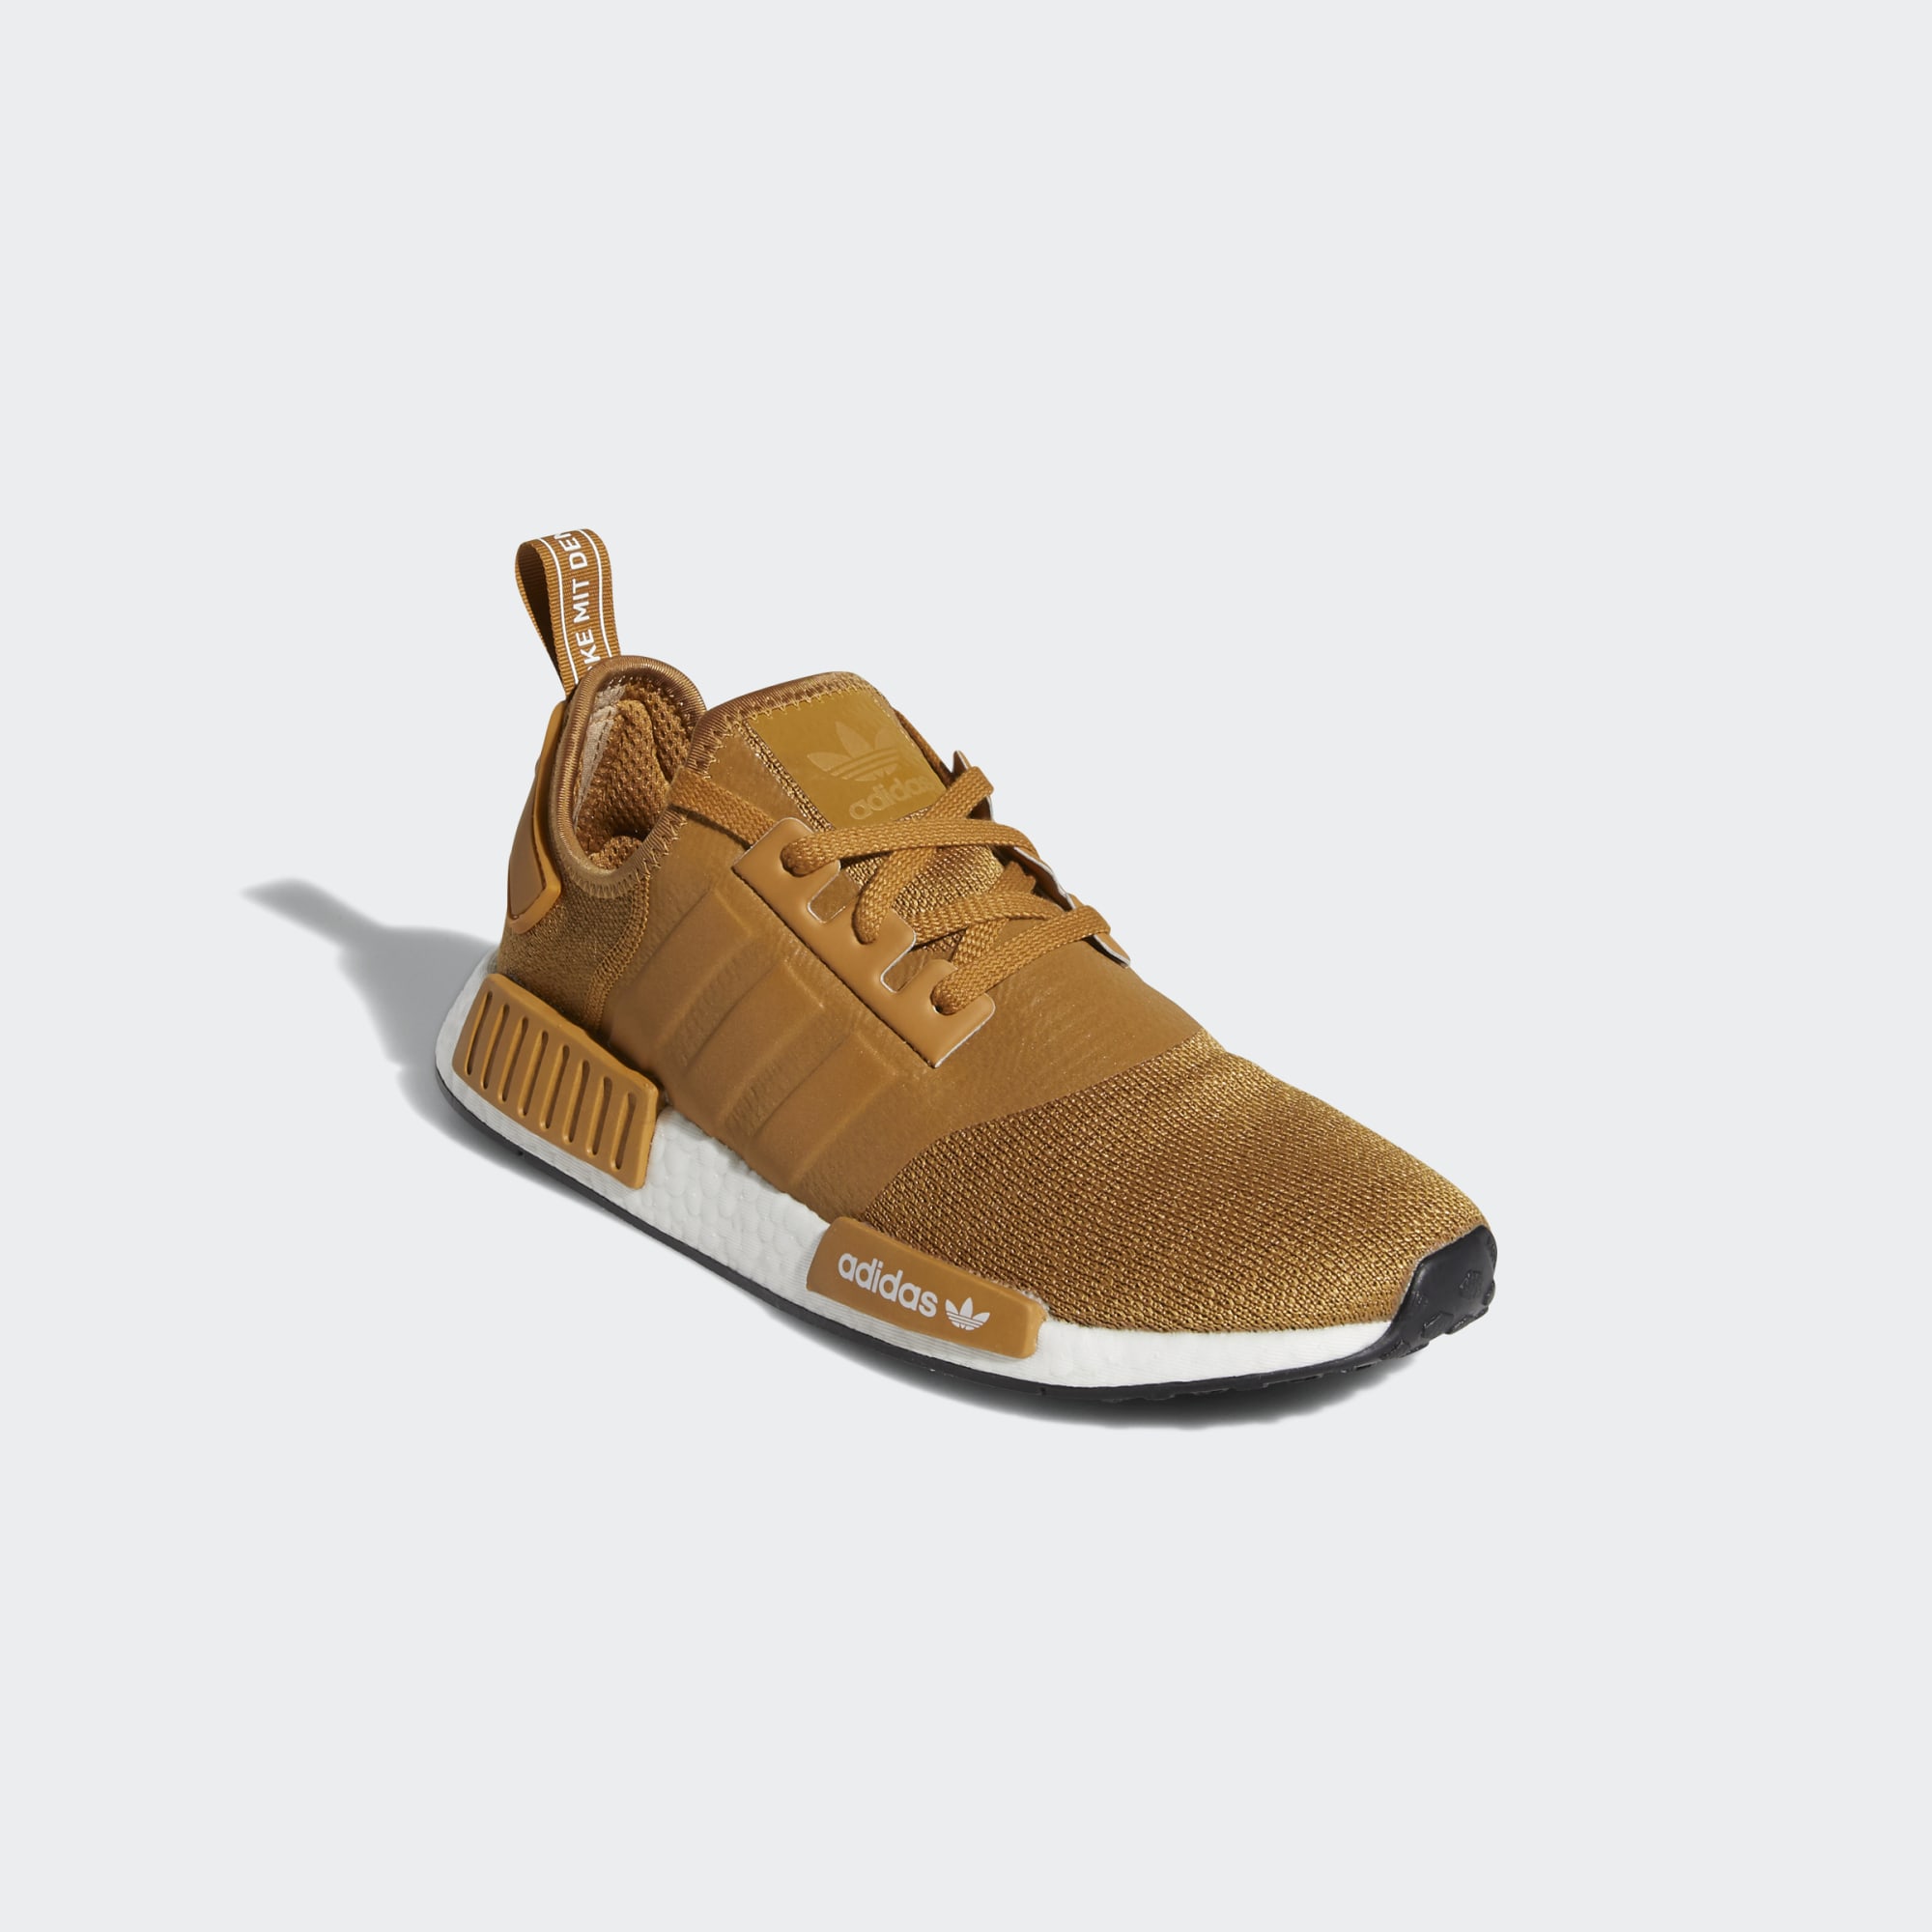 Adidas NMD R1 Mesa Release Date